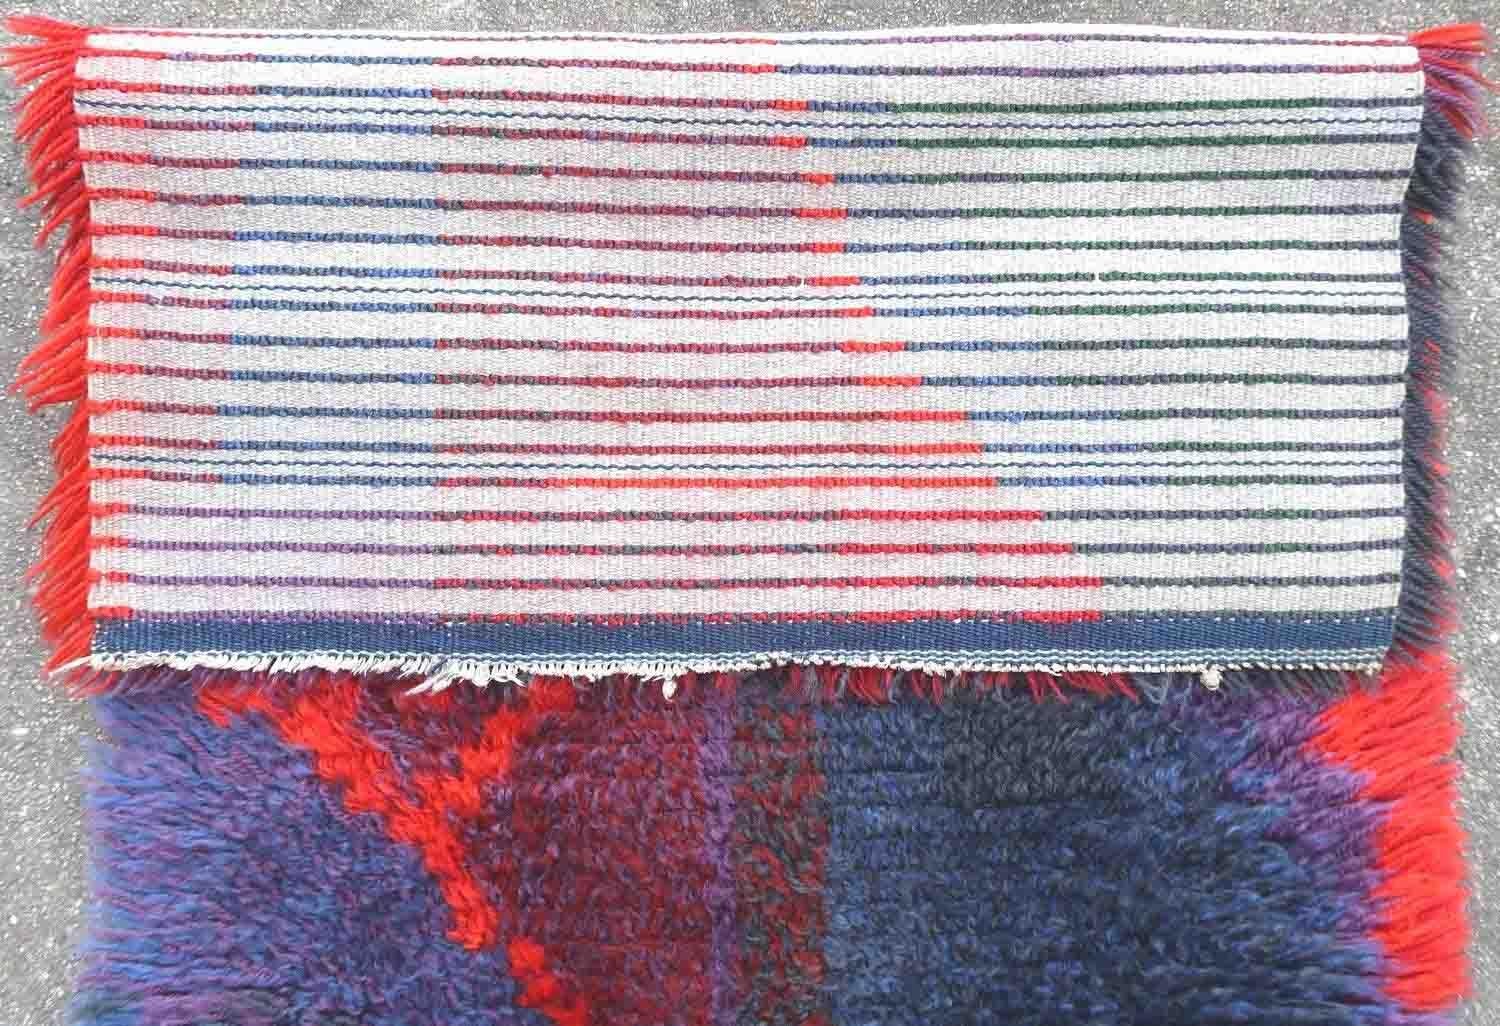 Handmade vintage Scandinavian Rya rug from Sweden in colorful shades and abstract design. The rug is from the middle of 20th century in original good condition.

-condition: original good,

-circa: 1950s,

-size: 1.9' x 3.6' (60cm x